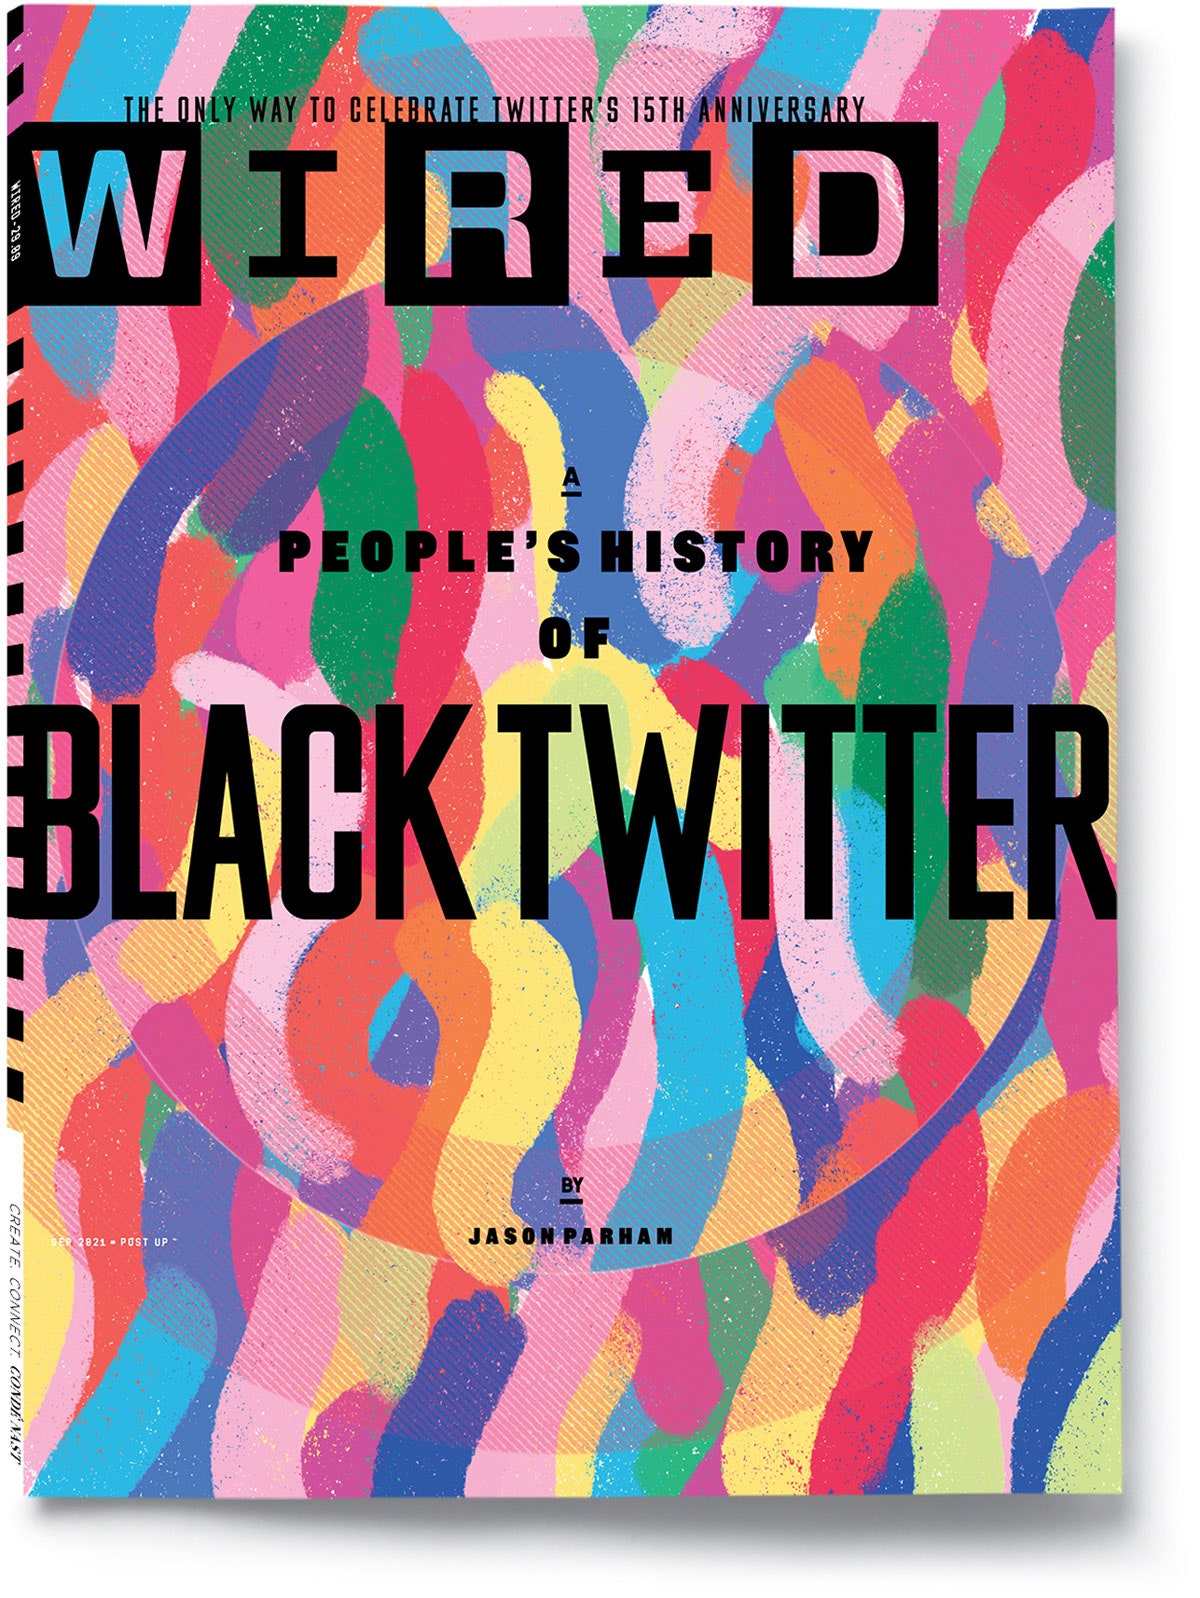 WIRED September 2021 Cover A People's History of Black Twitter